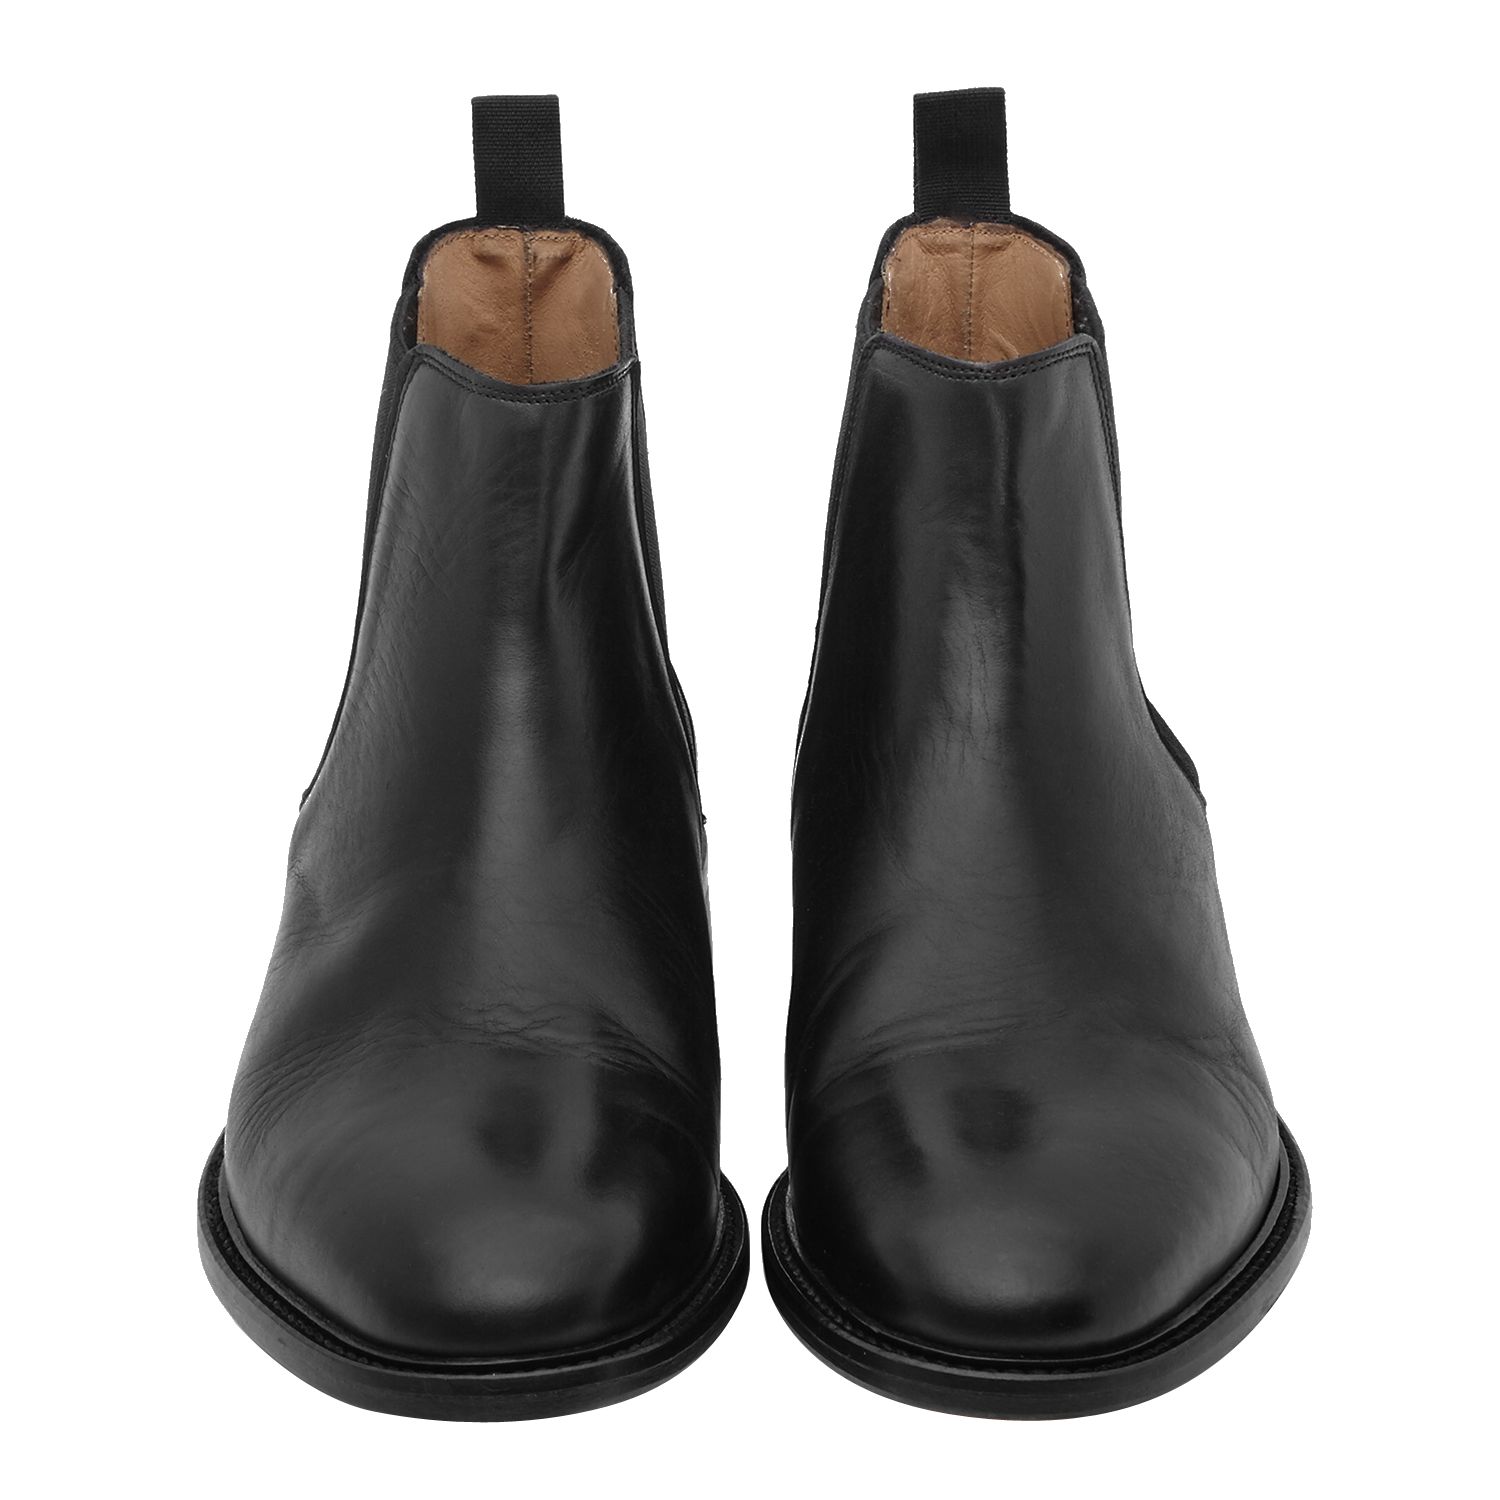 Reiss Tenor Leather Chelsea Boots, Black